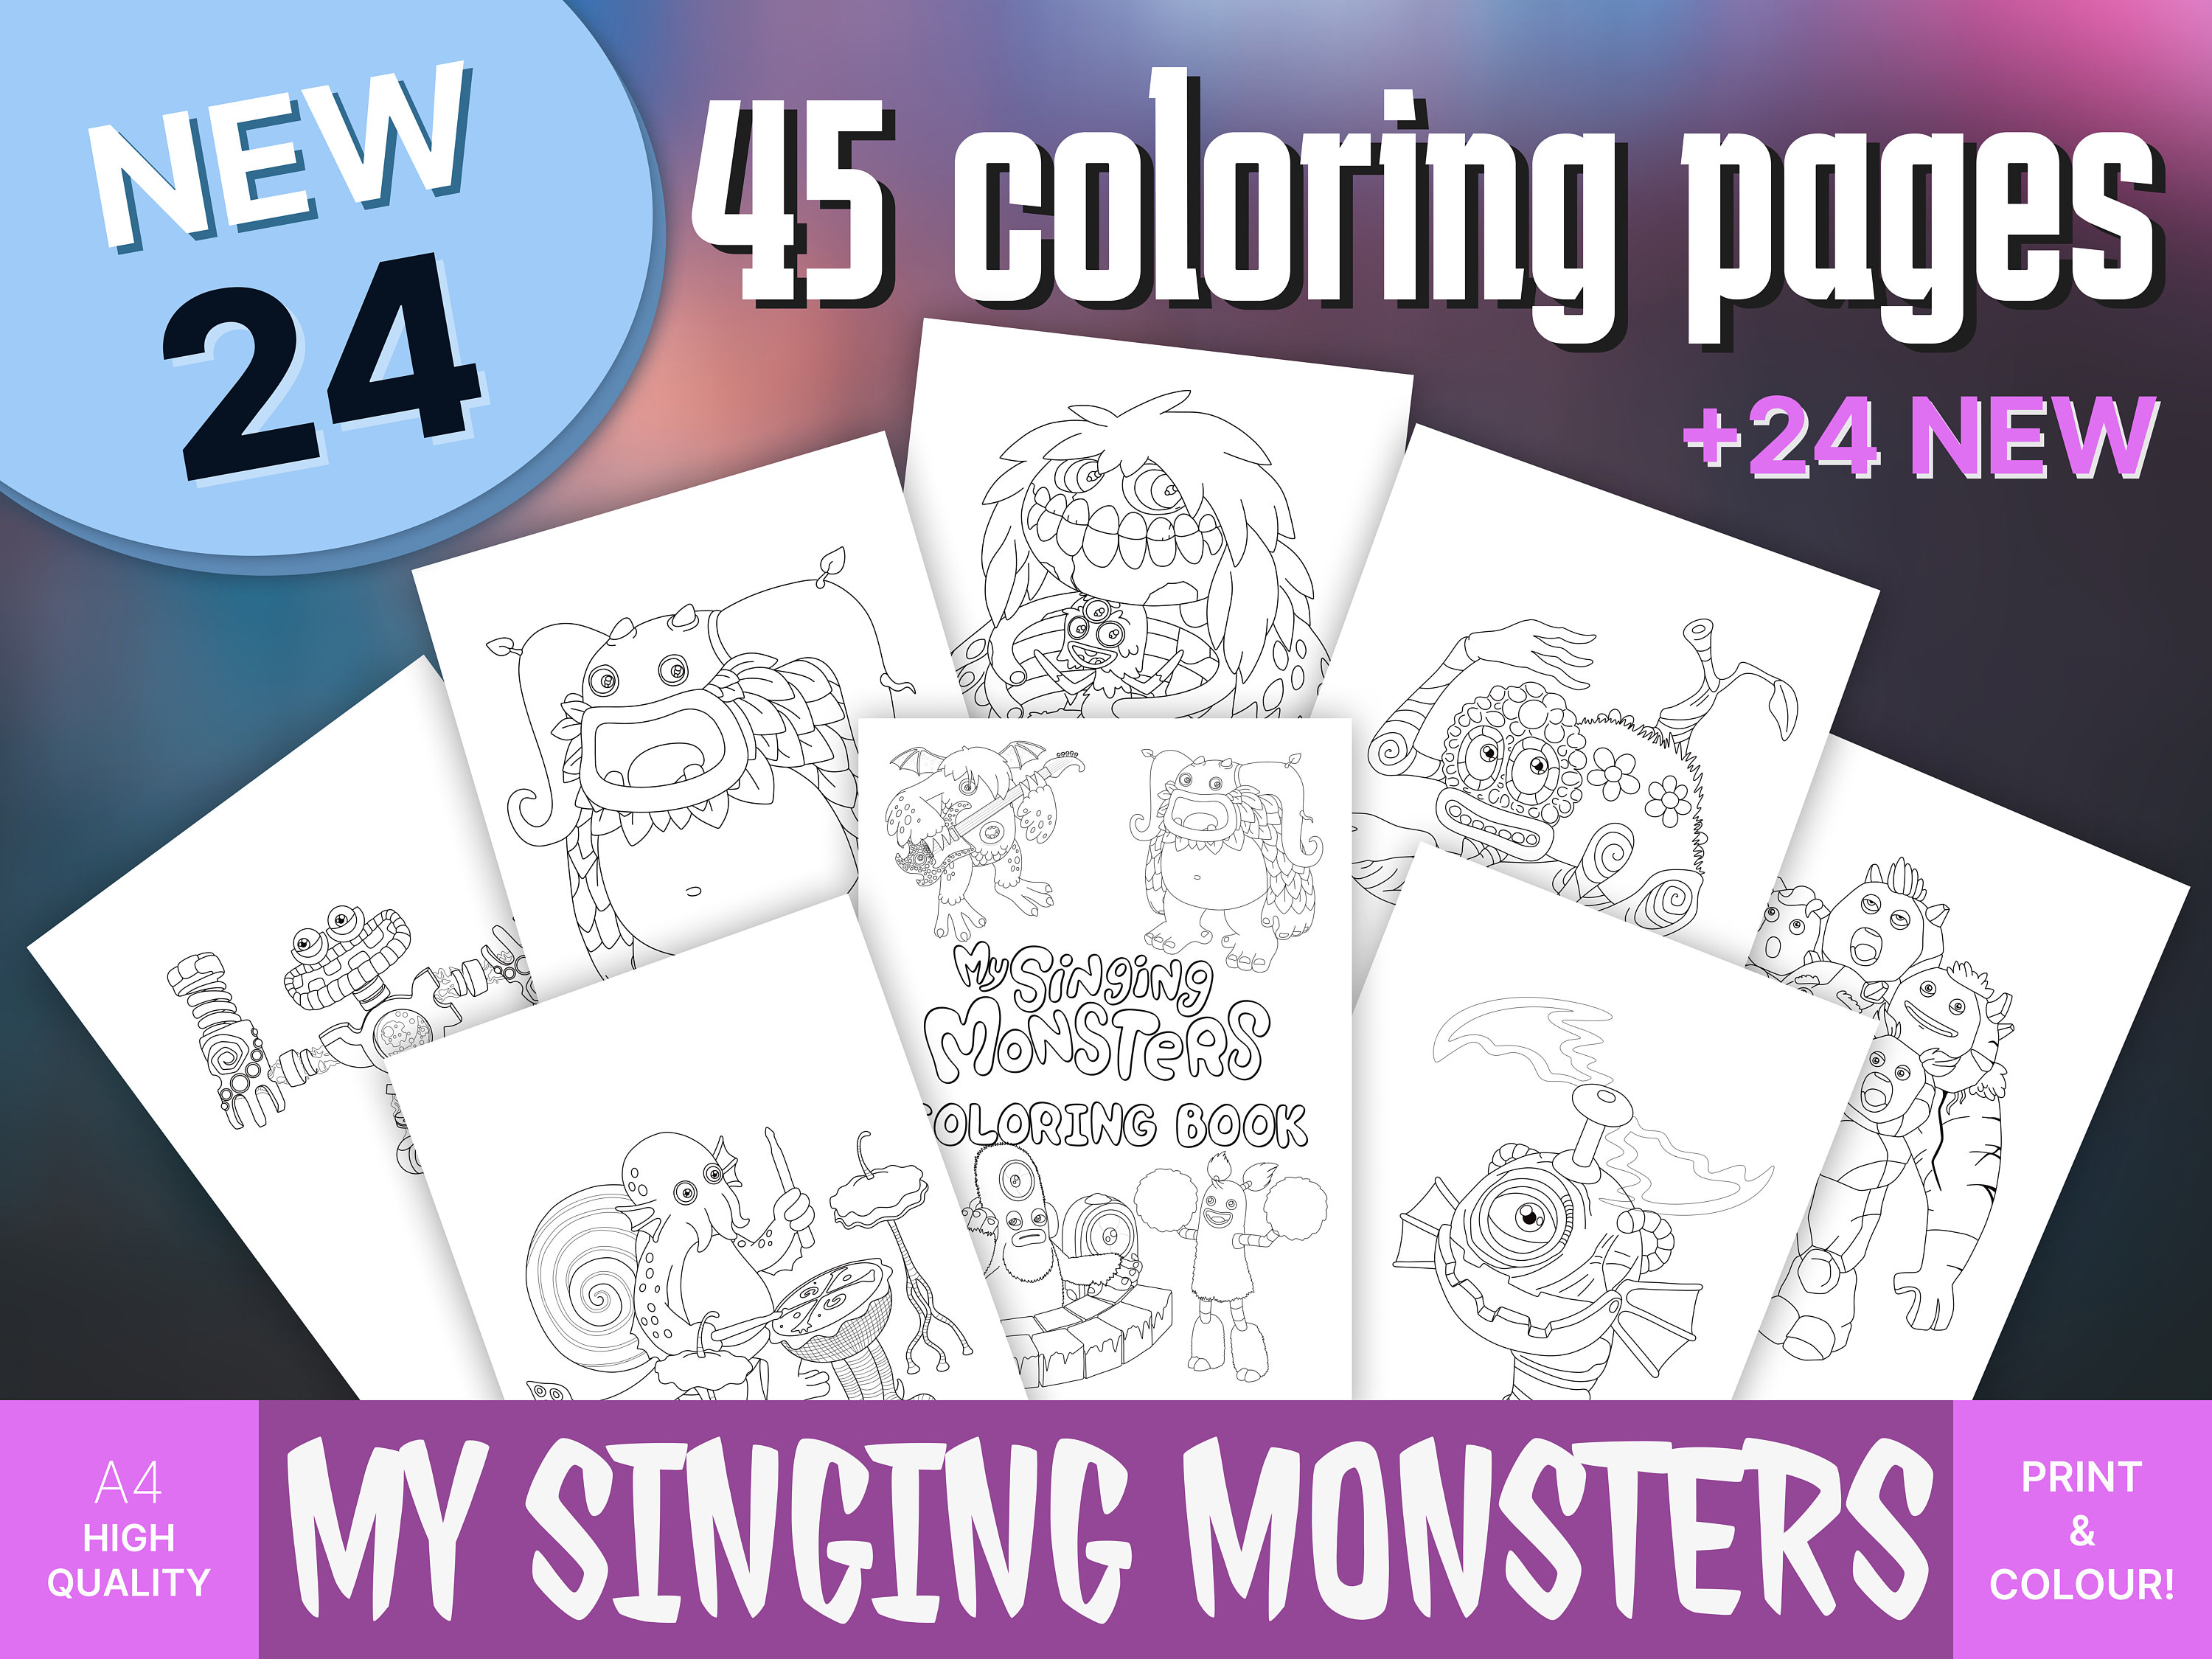 My singing monsters msm singing monsters regular monsters singing monsters coloring pages jpeg digital download coloring pages